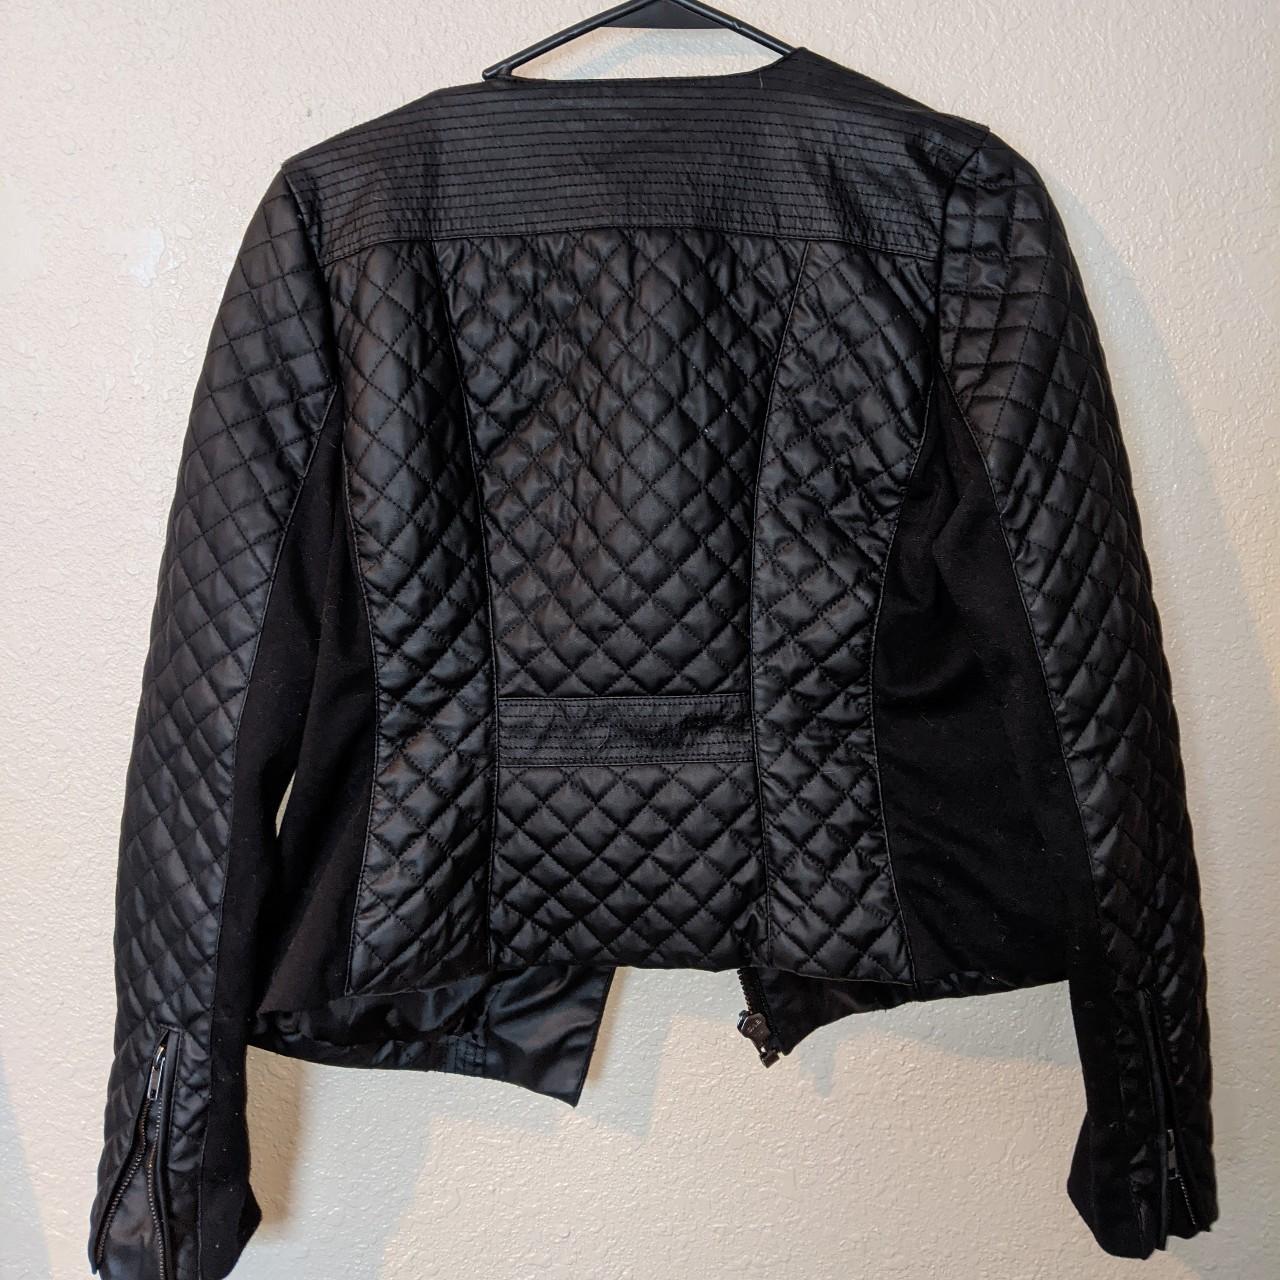 Product Image 4 - Leather Jacket

- Faux Leather
- Quilted